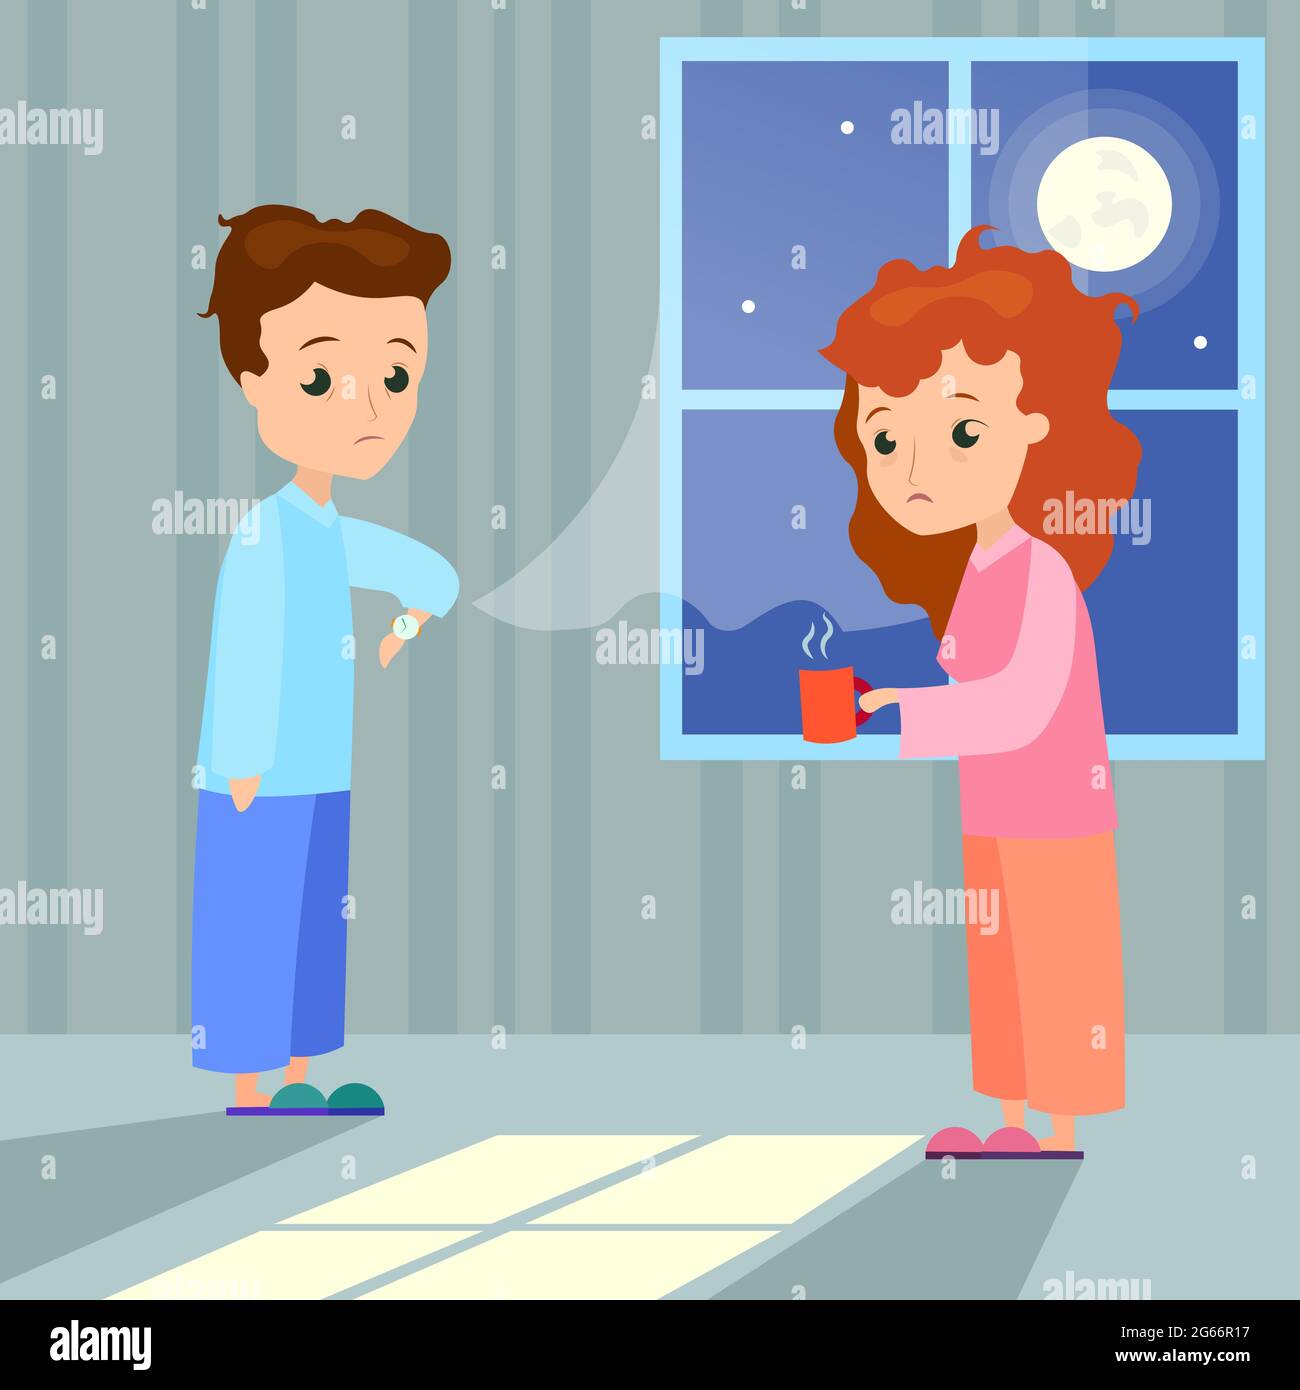 Vector illustration of insomnia concept. Woman with cup of water and man characters with insomnia or nightmare standing in night at home background Stock Vector